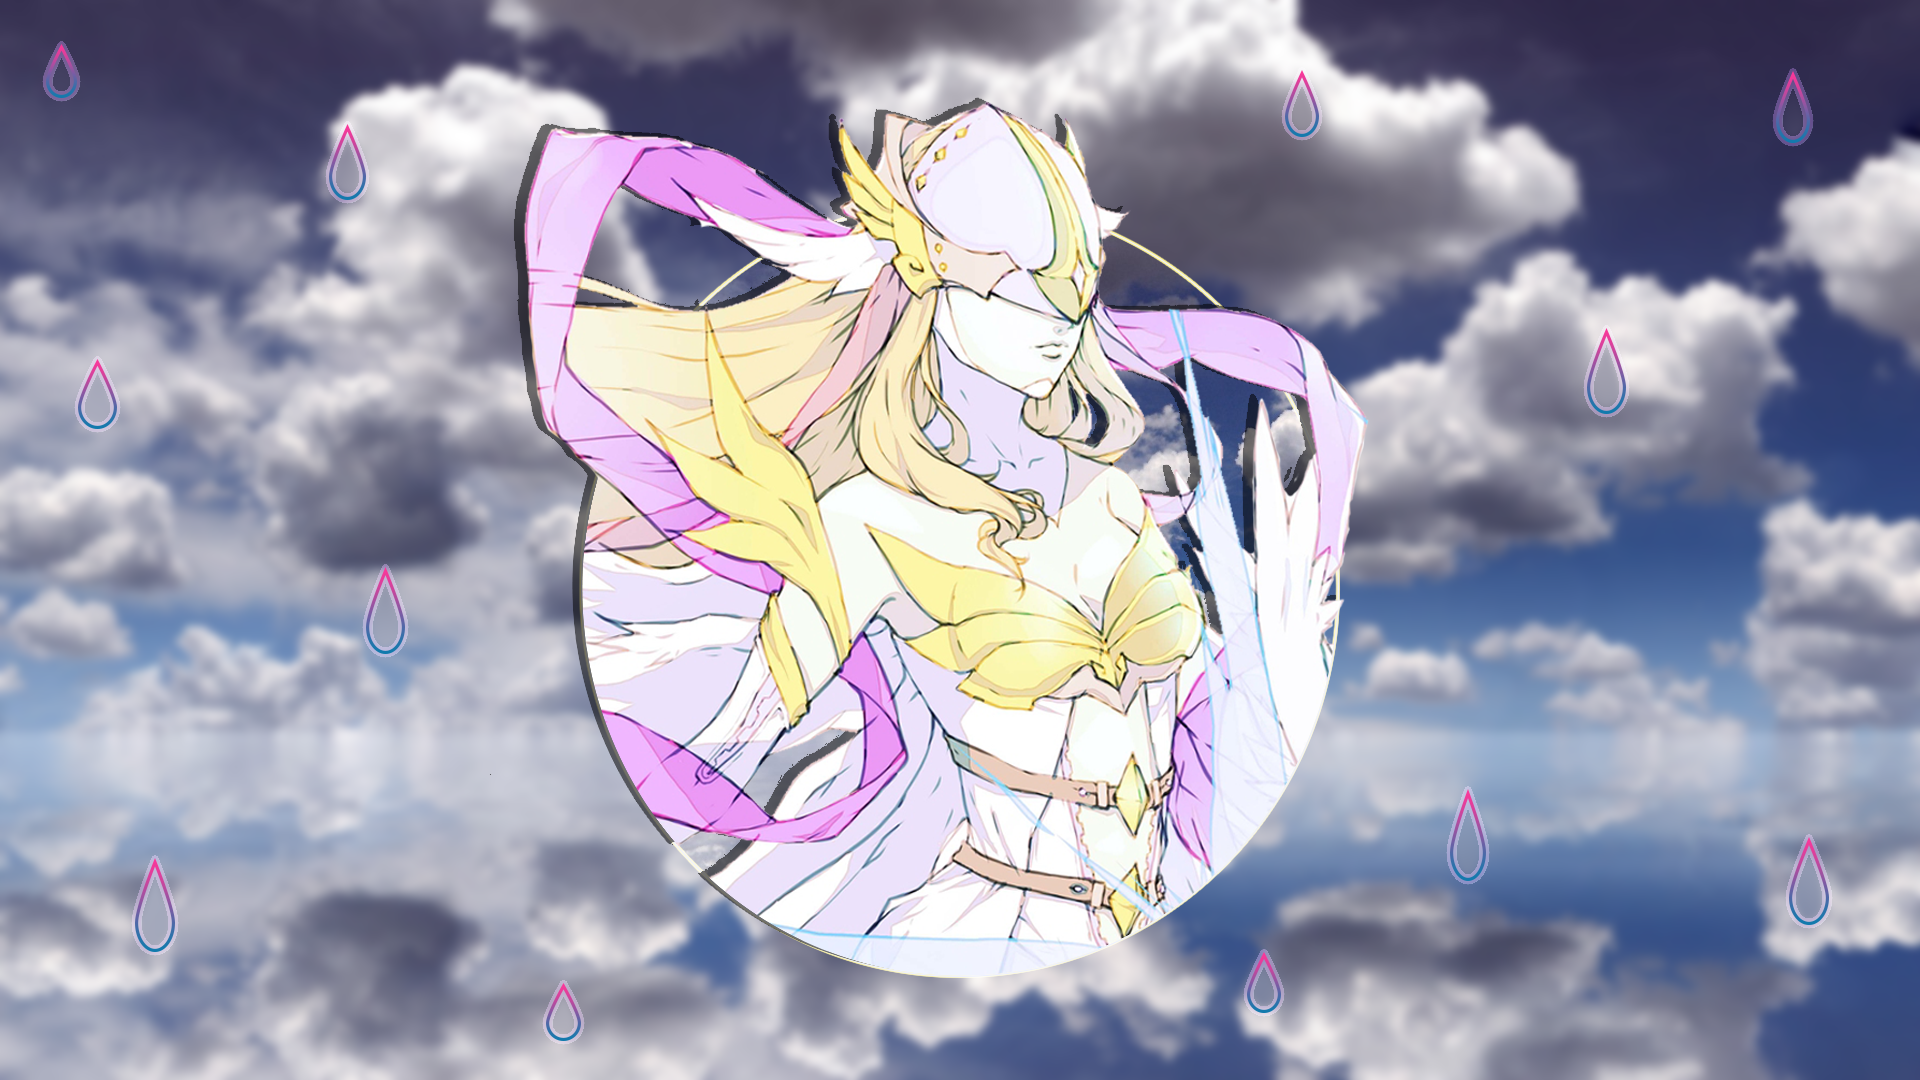 Picture In Picture Angewomon Digimon 1920x1080